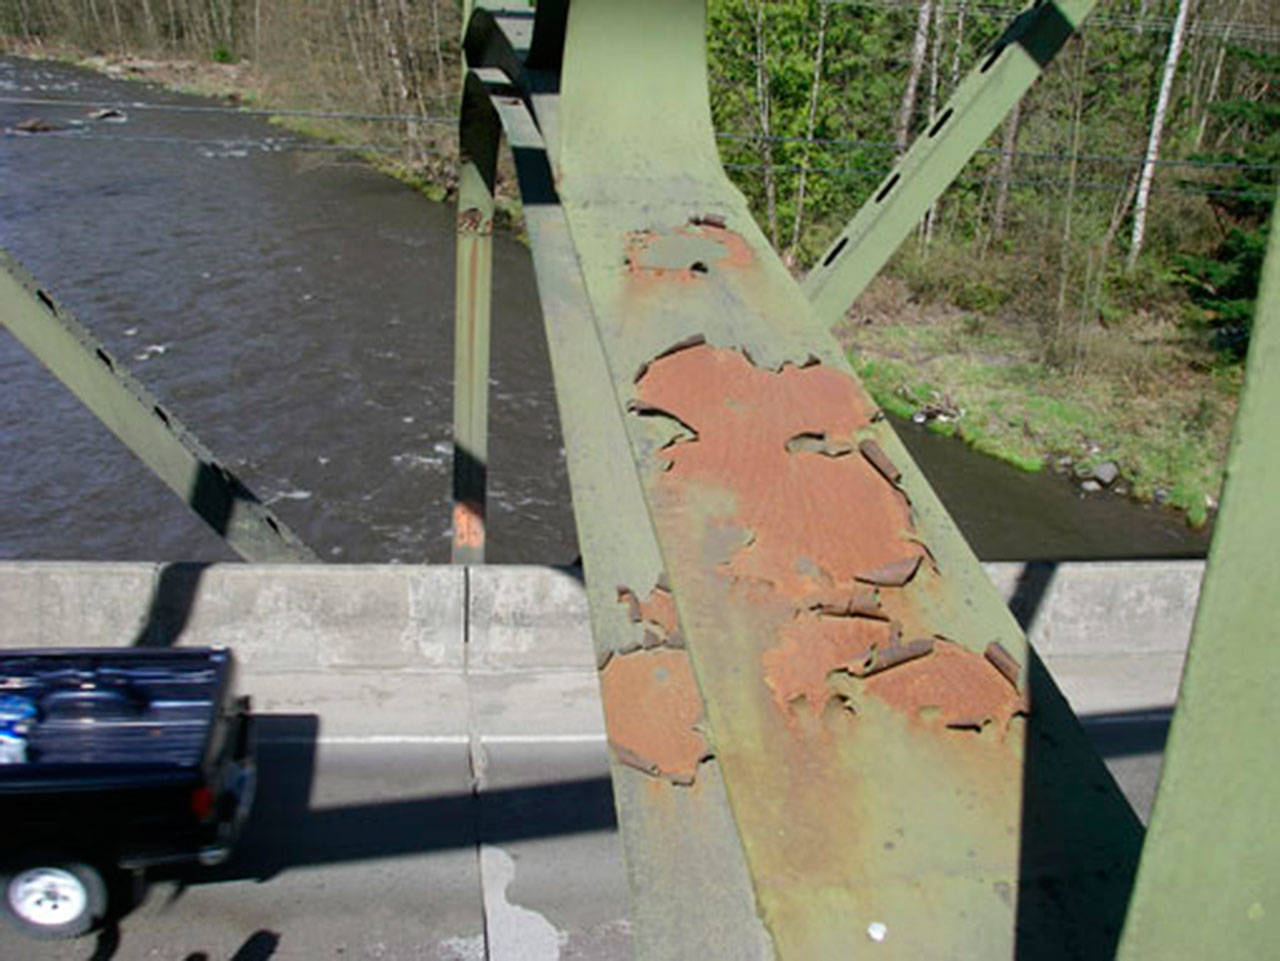 The White River Bridge between Enumclaw and Buckley will need to be sanded to get off rust and old, peeling paint before a new coat can be put on. Photo courtesy WSDOT